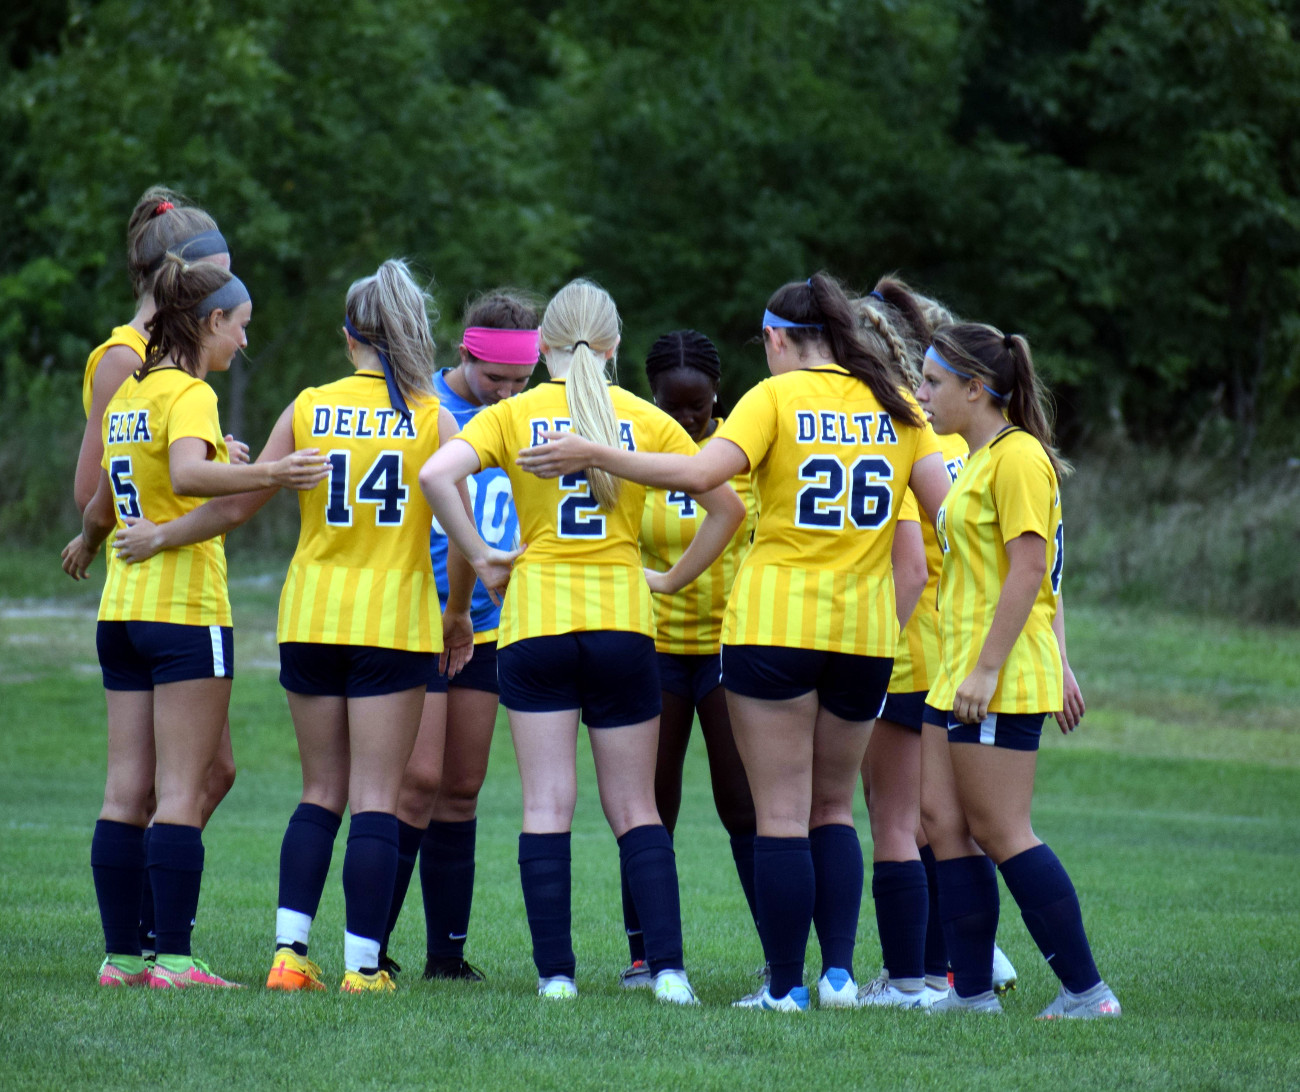 Girls soccer team in a huddle during a game.